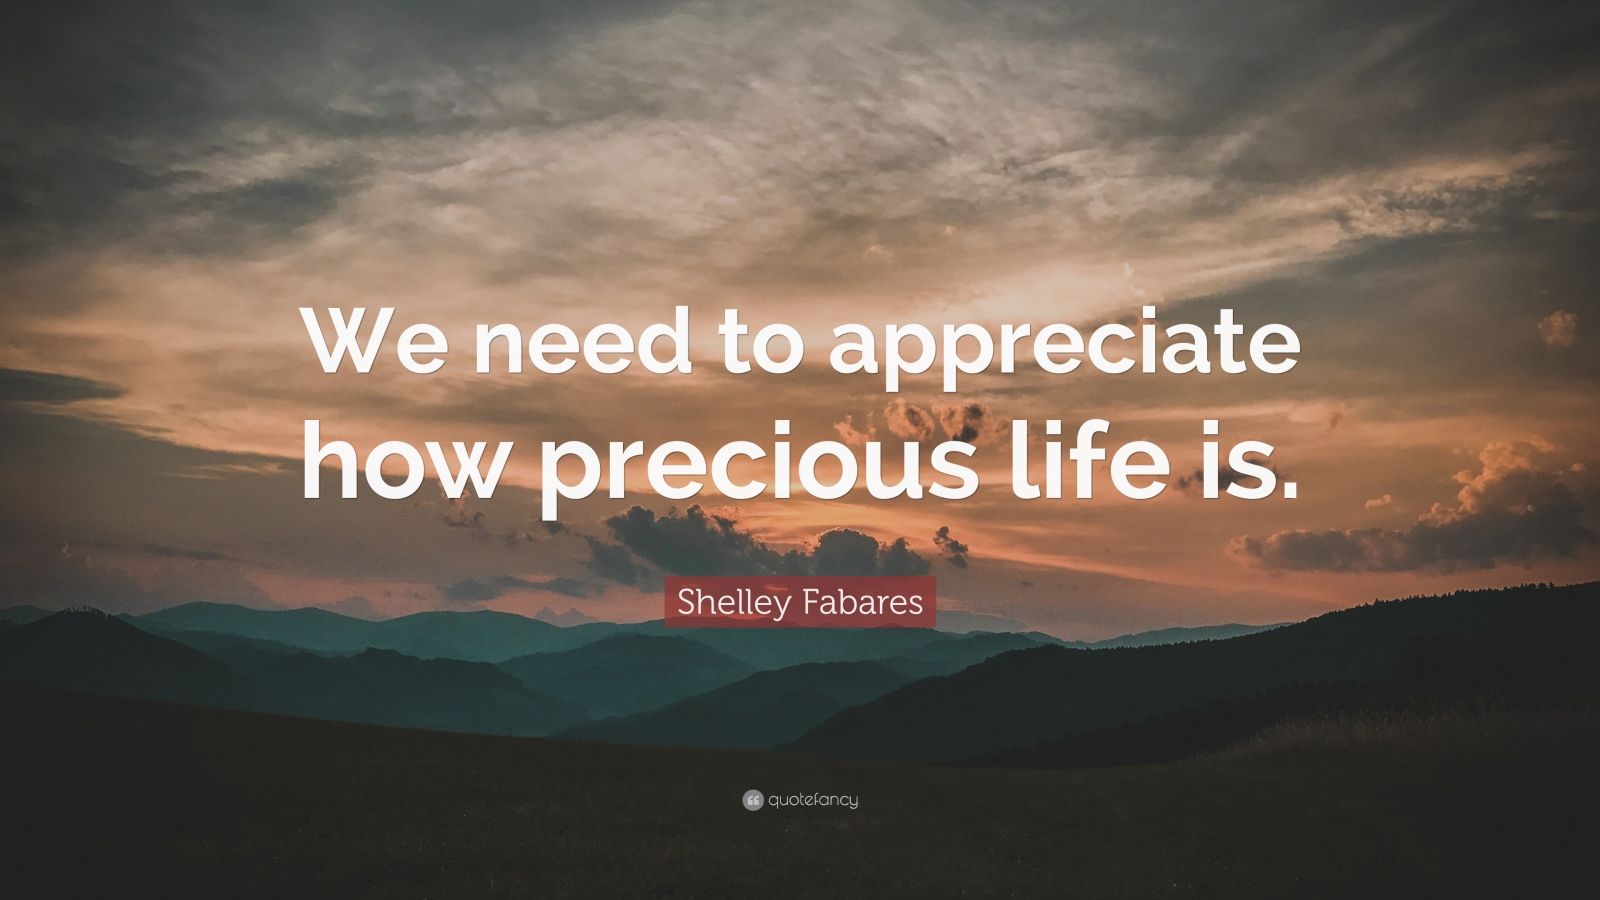 Shelley Fabares Quote: "We need to appreciate how precious life is." (9 wallpapers) - Quotefancy